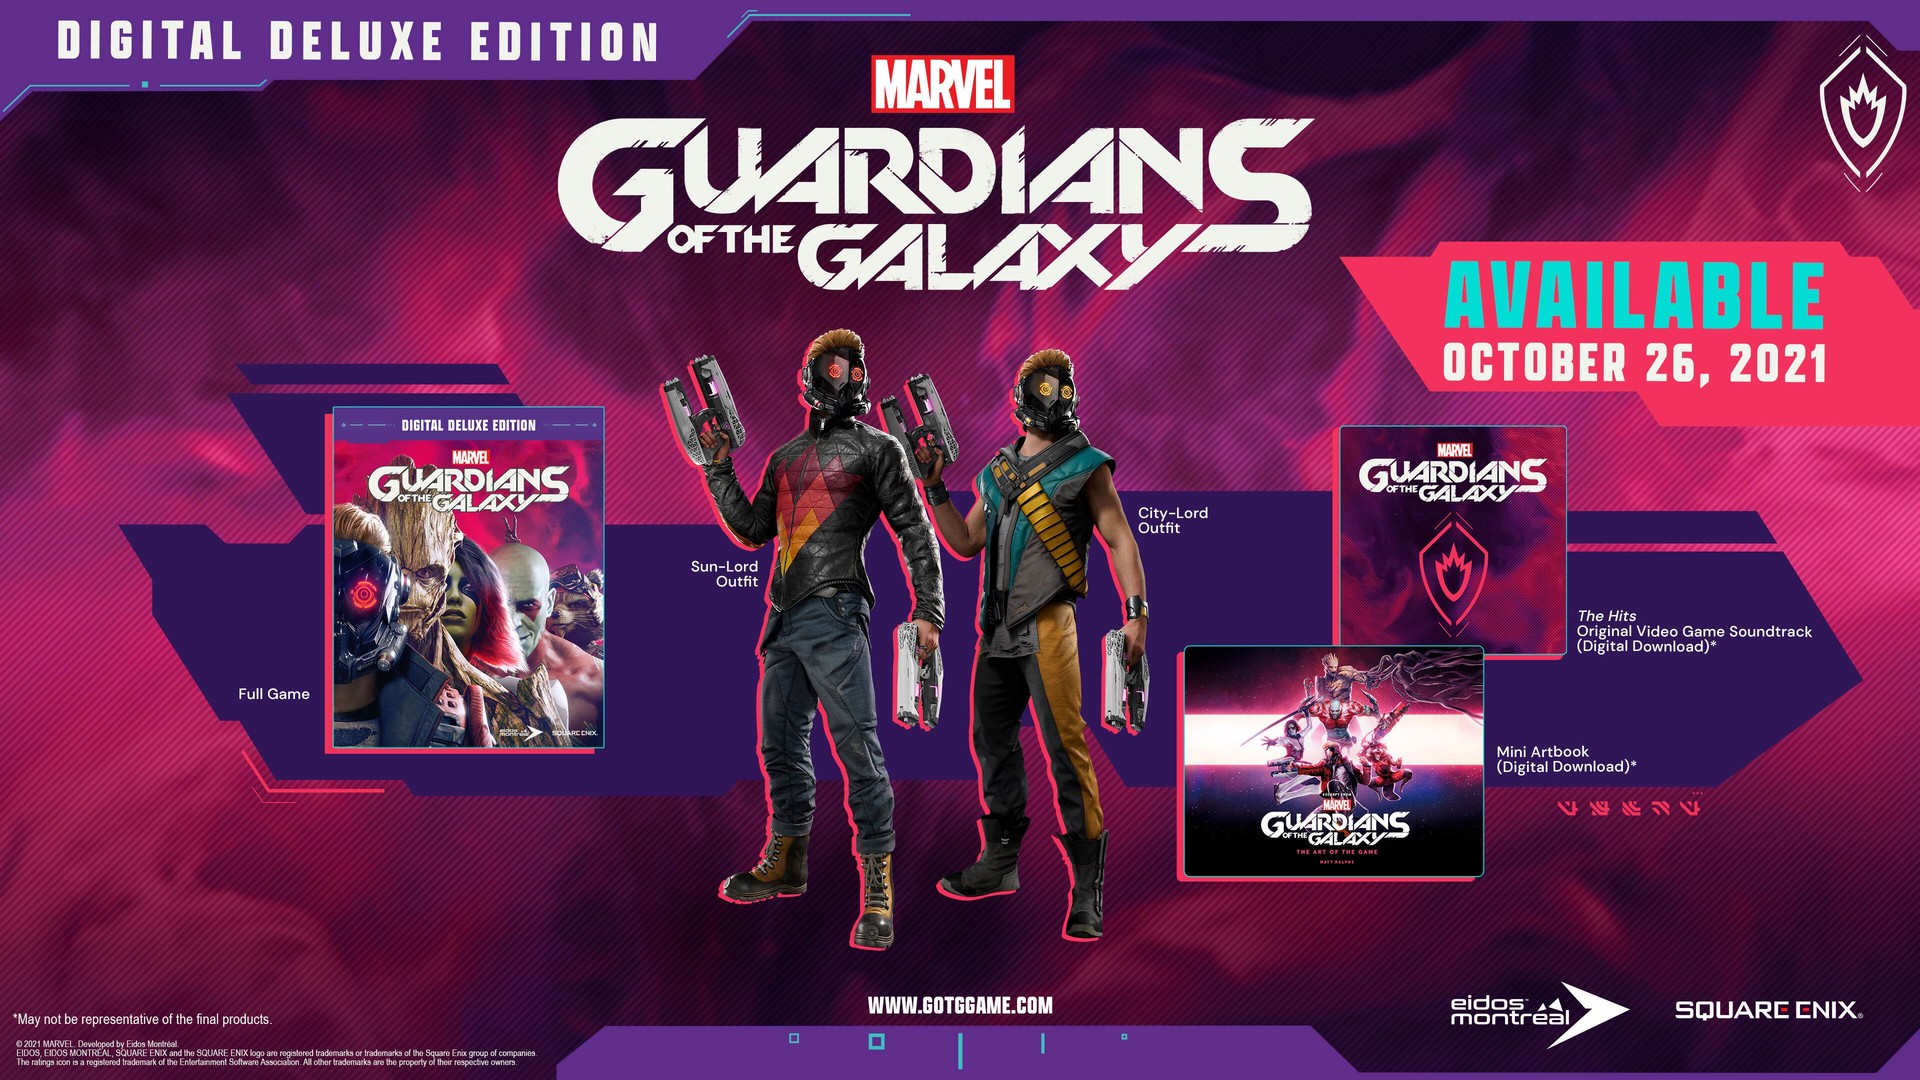 MARVEL'S GUARDIANS OF THE GALAXY Free Download MARVEL'S GUARDIANS OF THE GALAXY download free MARVEL'S GUARDIANS OF THE GALAXY download free full version pc MARVEL'S GUARDIANS OF THE GALAXY download mod MARVEL'S GUARDIANS OF THE GALAXY download pc MARVEL'S GUARDIANS OF THE GALAXY download free version game setup MARVEL'S GUARDIANS OF THE GALAXY download 32 bit MARVEL'S GUARDIANS OF THE GALAXY download windows 10 MARVEL'S GUARDIANS OF THE GALAXY download compressed MARVEL'S GUARDIANS OF THE GALAXY download for pc windows 7 32 bit MARVEL'S GUARDIANS OF THE GALAXY download link MARVEL'S GUARDIANS OF THE GALAXY download windows 7 32 bit MARVEL'S GUARDIANS OF THE GALAXY download 2021 MARVEL'S GUARDIANS OF THE GALAXY download pc windows 7 MARVEL'S GUARDIANS OF THE GALAXY download for pc highly compressed MARVEL'S GUARDIANS OF THE GALAXY download key MARVEL'S GUARDIANS OF THE GALAXY download pc windows 10 MARVEL'S GUARDIANS OF THE GALAXY download setup MARVEL'S GUARDIANS OF THE GALAXY launchpad download MARVEL'S GUARDIANS OF THE GALAXY download exe MARVEL'S GUARDIANS OF THE GALAXY download update cheat engine for MARVEL'S GUARDIANS OF THE GALAXY download MARVEL'S GUARDIANS OF THE GALAXY download mac MARVEL'S GUARDIANS OF THE GALAXY download 2021 MARVEL'S GUARDIANS OF THE GALAXY download for windows 7 MARVEL'S GUARDIANS OF THE GALAXY download google drive MARVEL'S GUARDIANS OF THE GALAXY mods download zip MARVEL'S GUARDIANS OF THE GALAXY torrent download